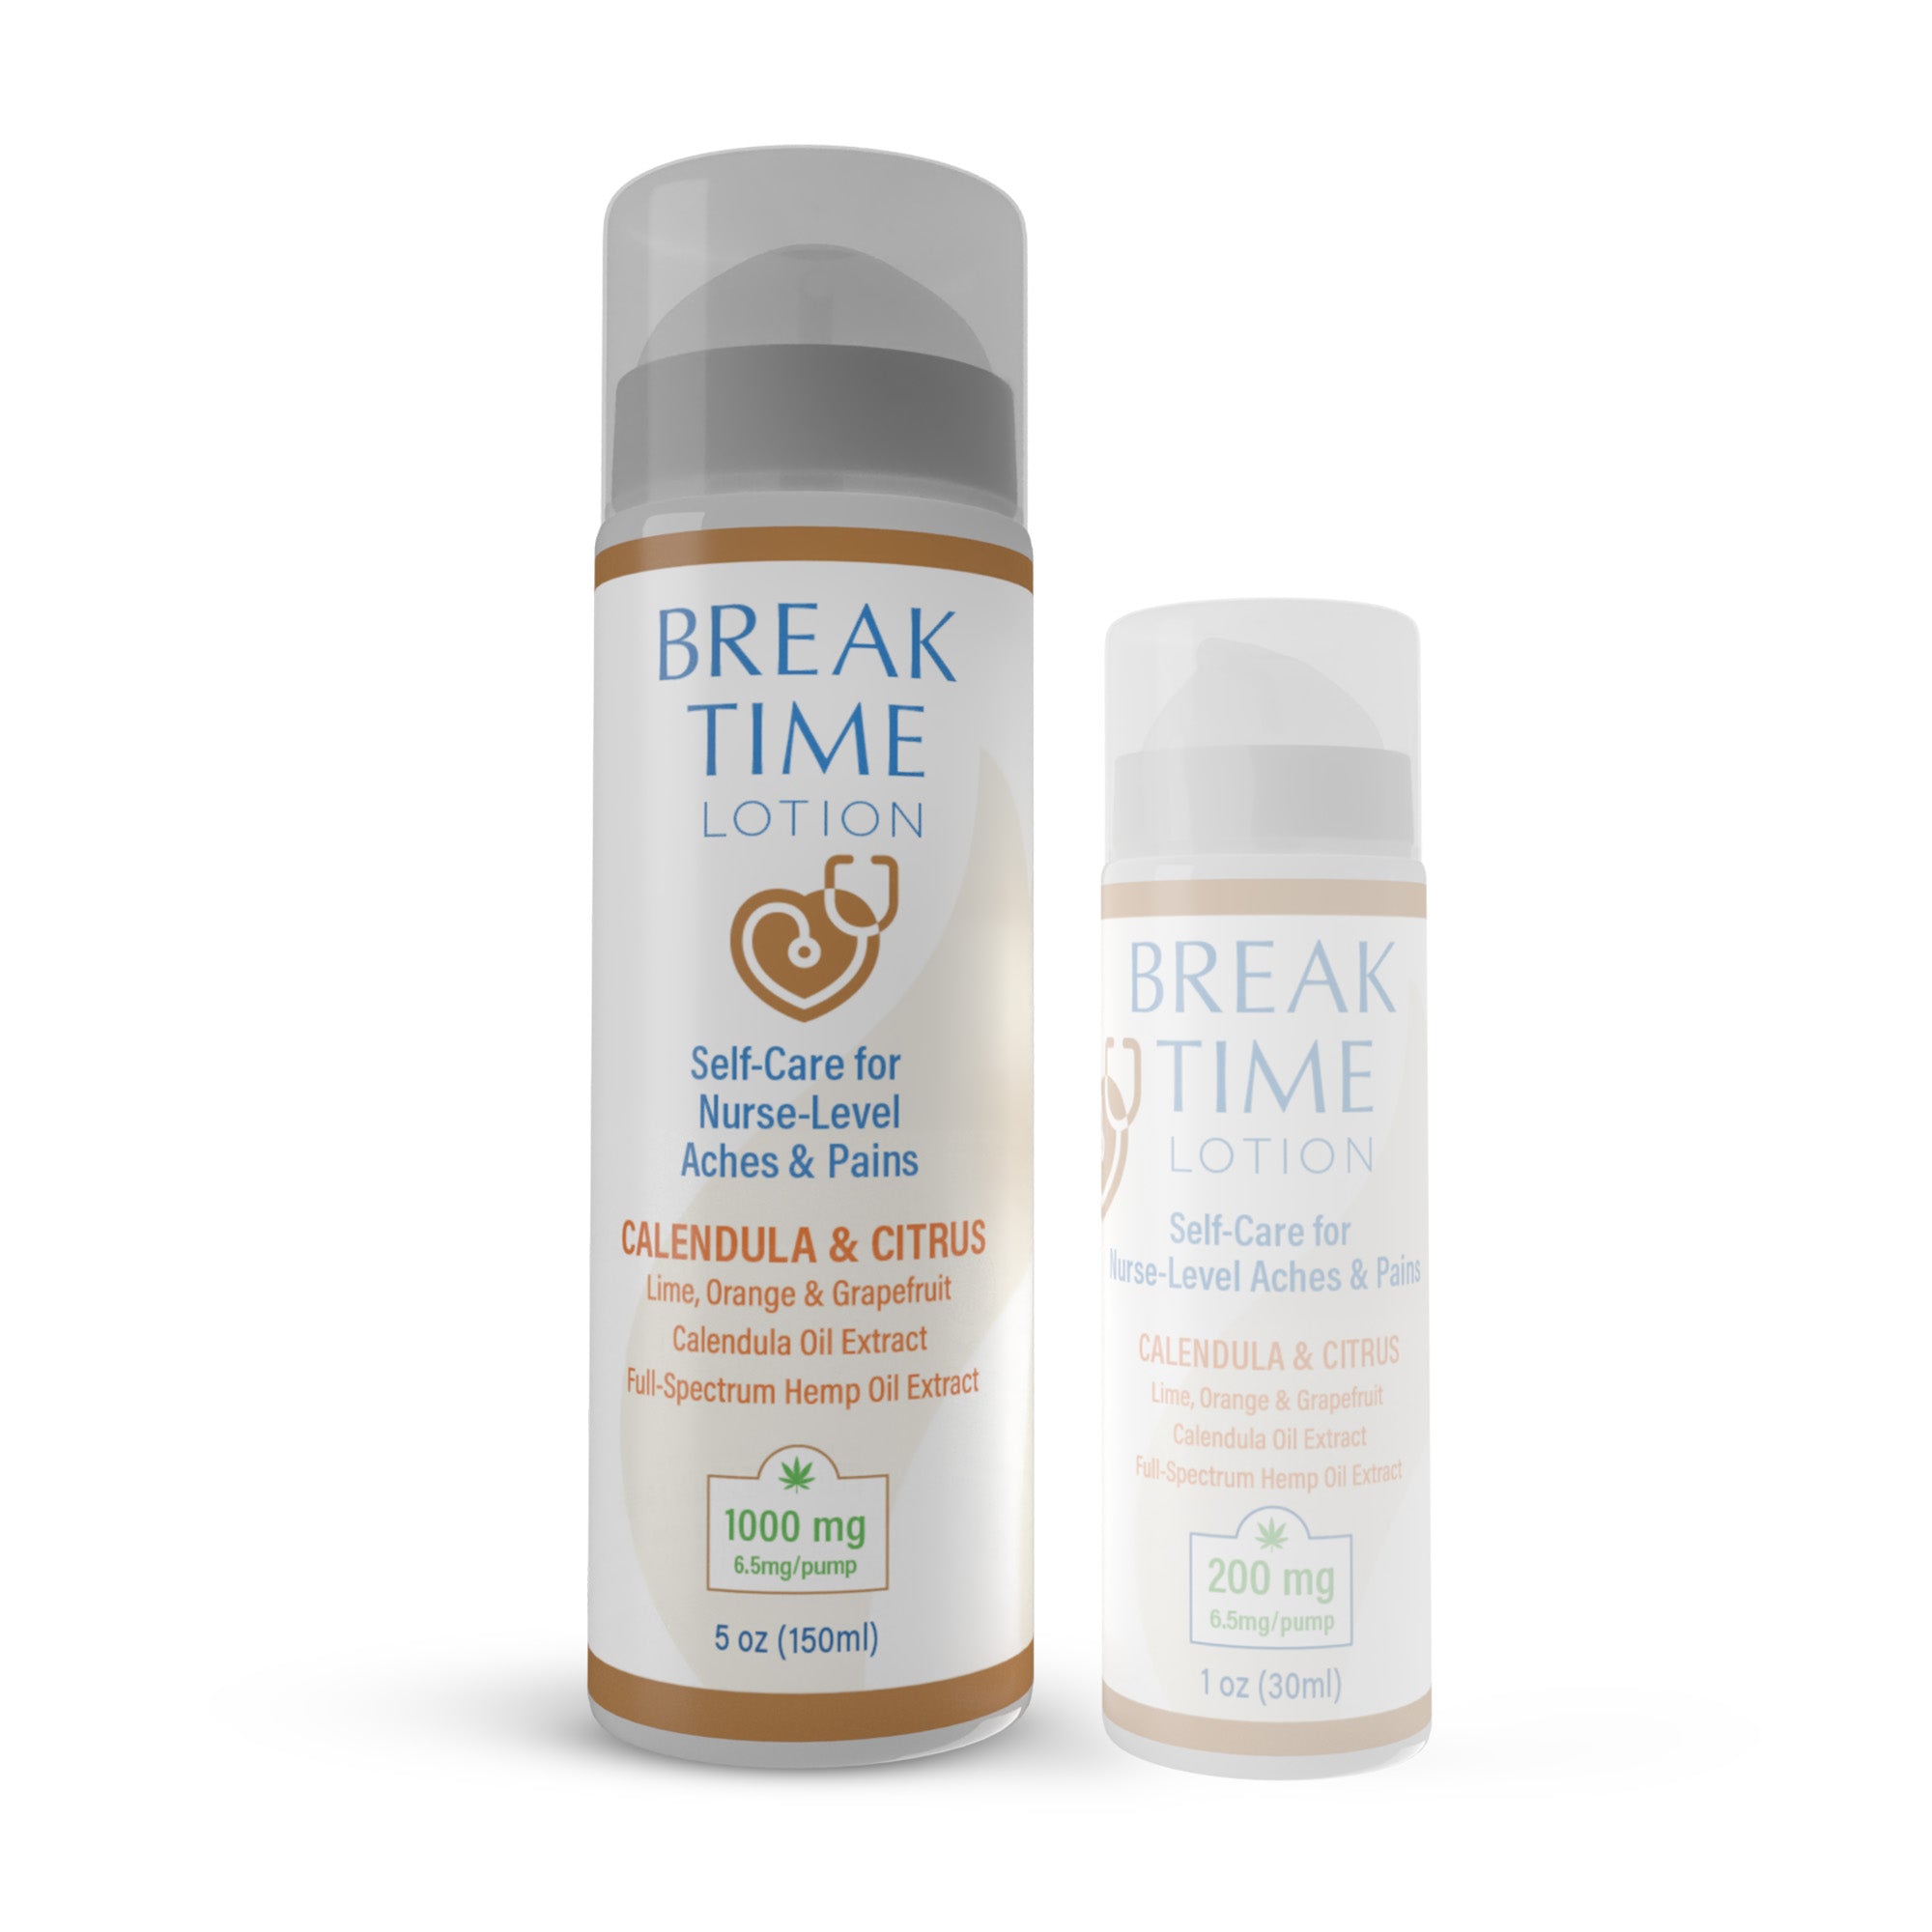 BREAKTIME Lotion from Rekindled Nurse-You spend your life caring for people.
Around the clock, from loved ones to patients, you give 110% of yourself to provide comfort and healing to others.
When you’re-Cedar Meadow Farm